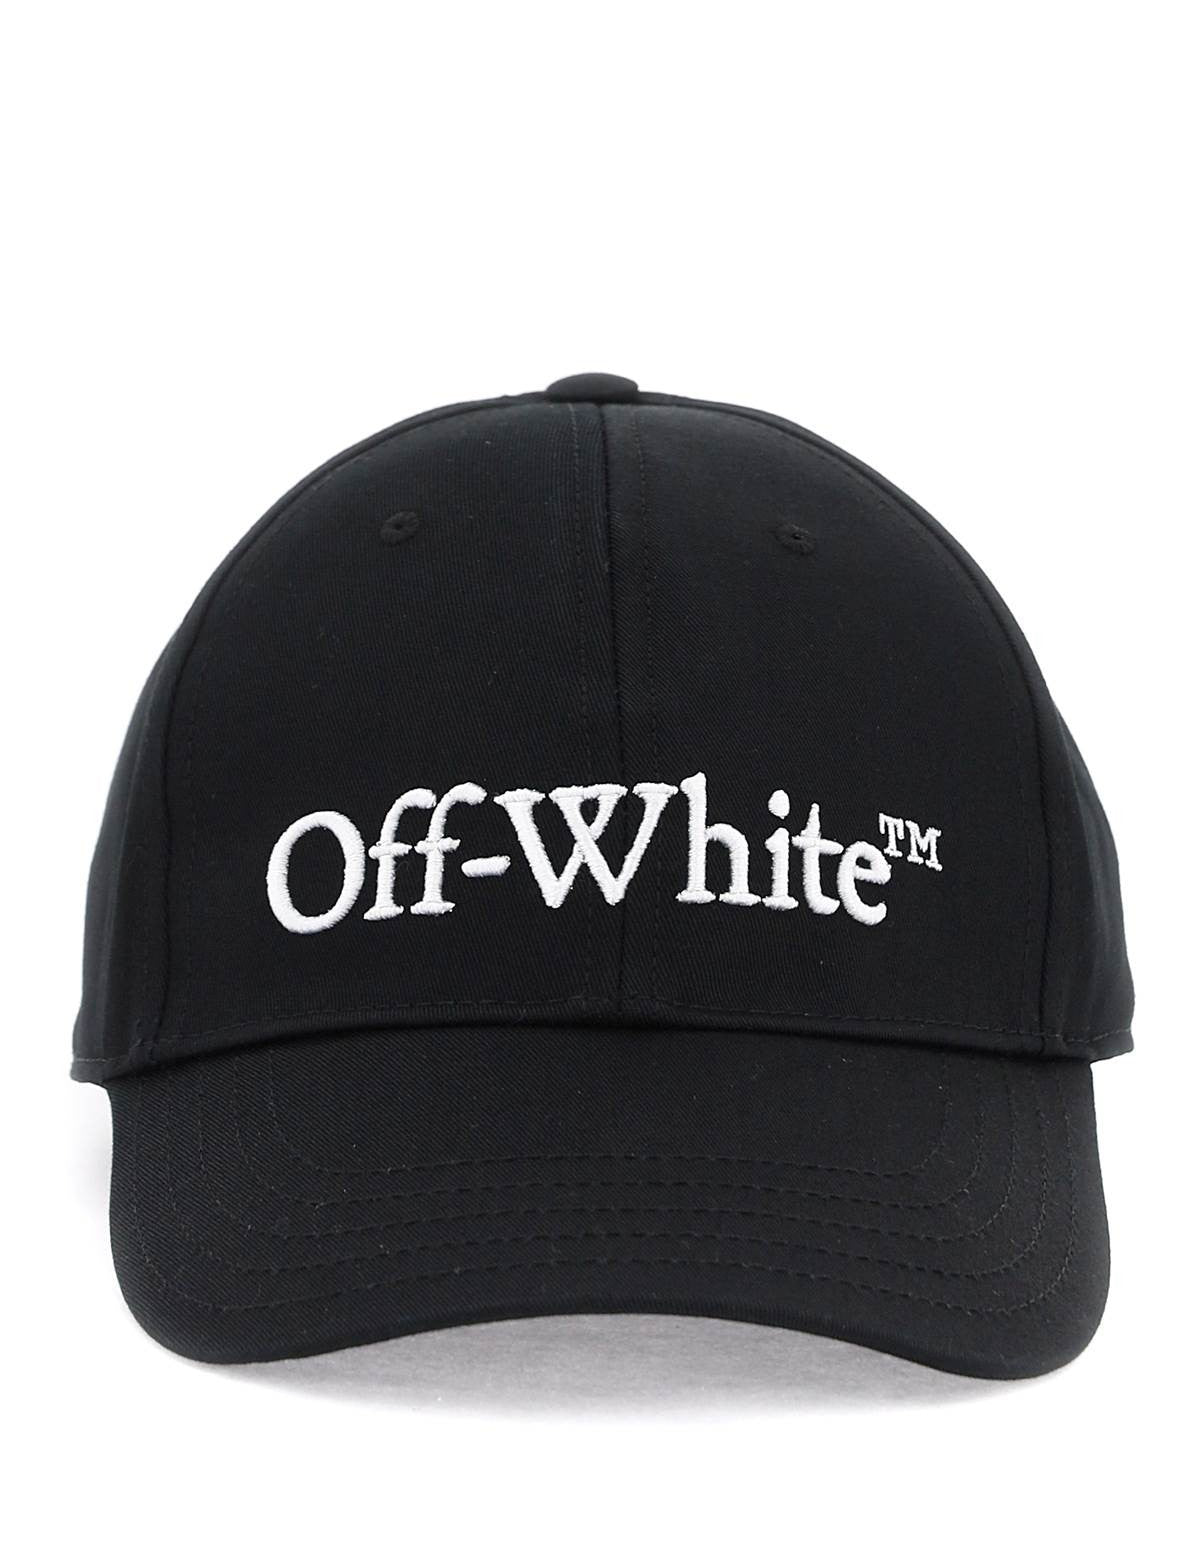 off-white-embroidered-logo-baseball-cap-with.jpg